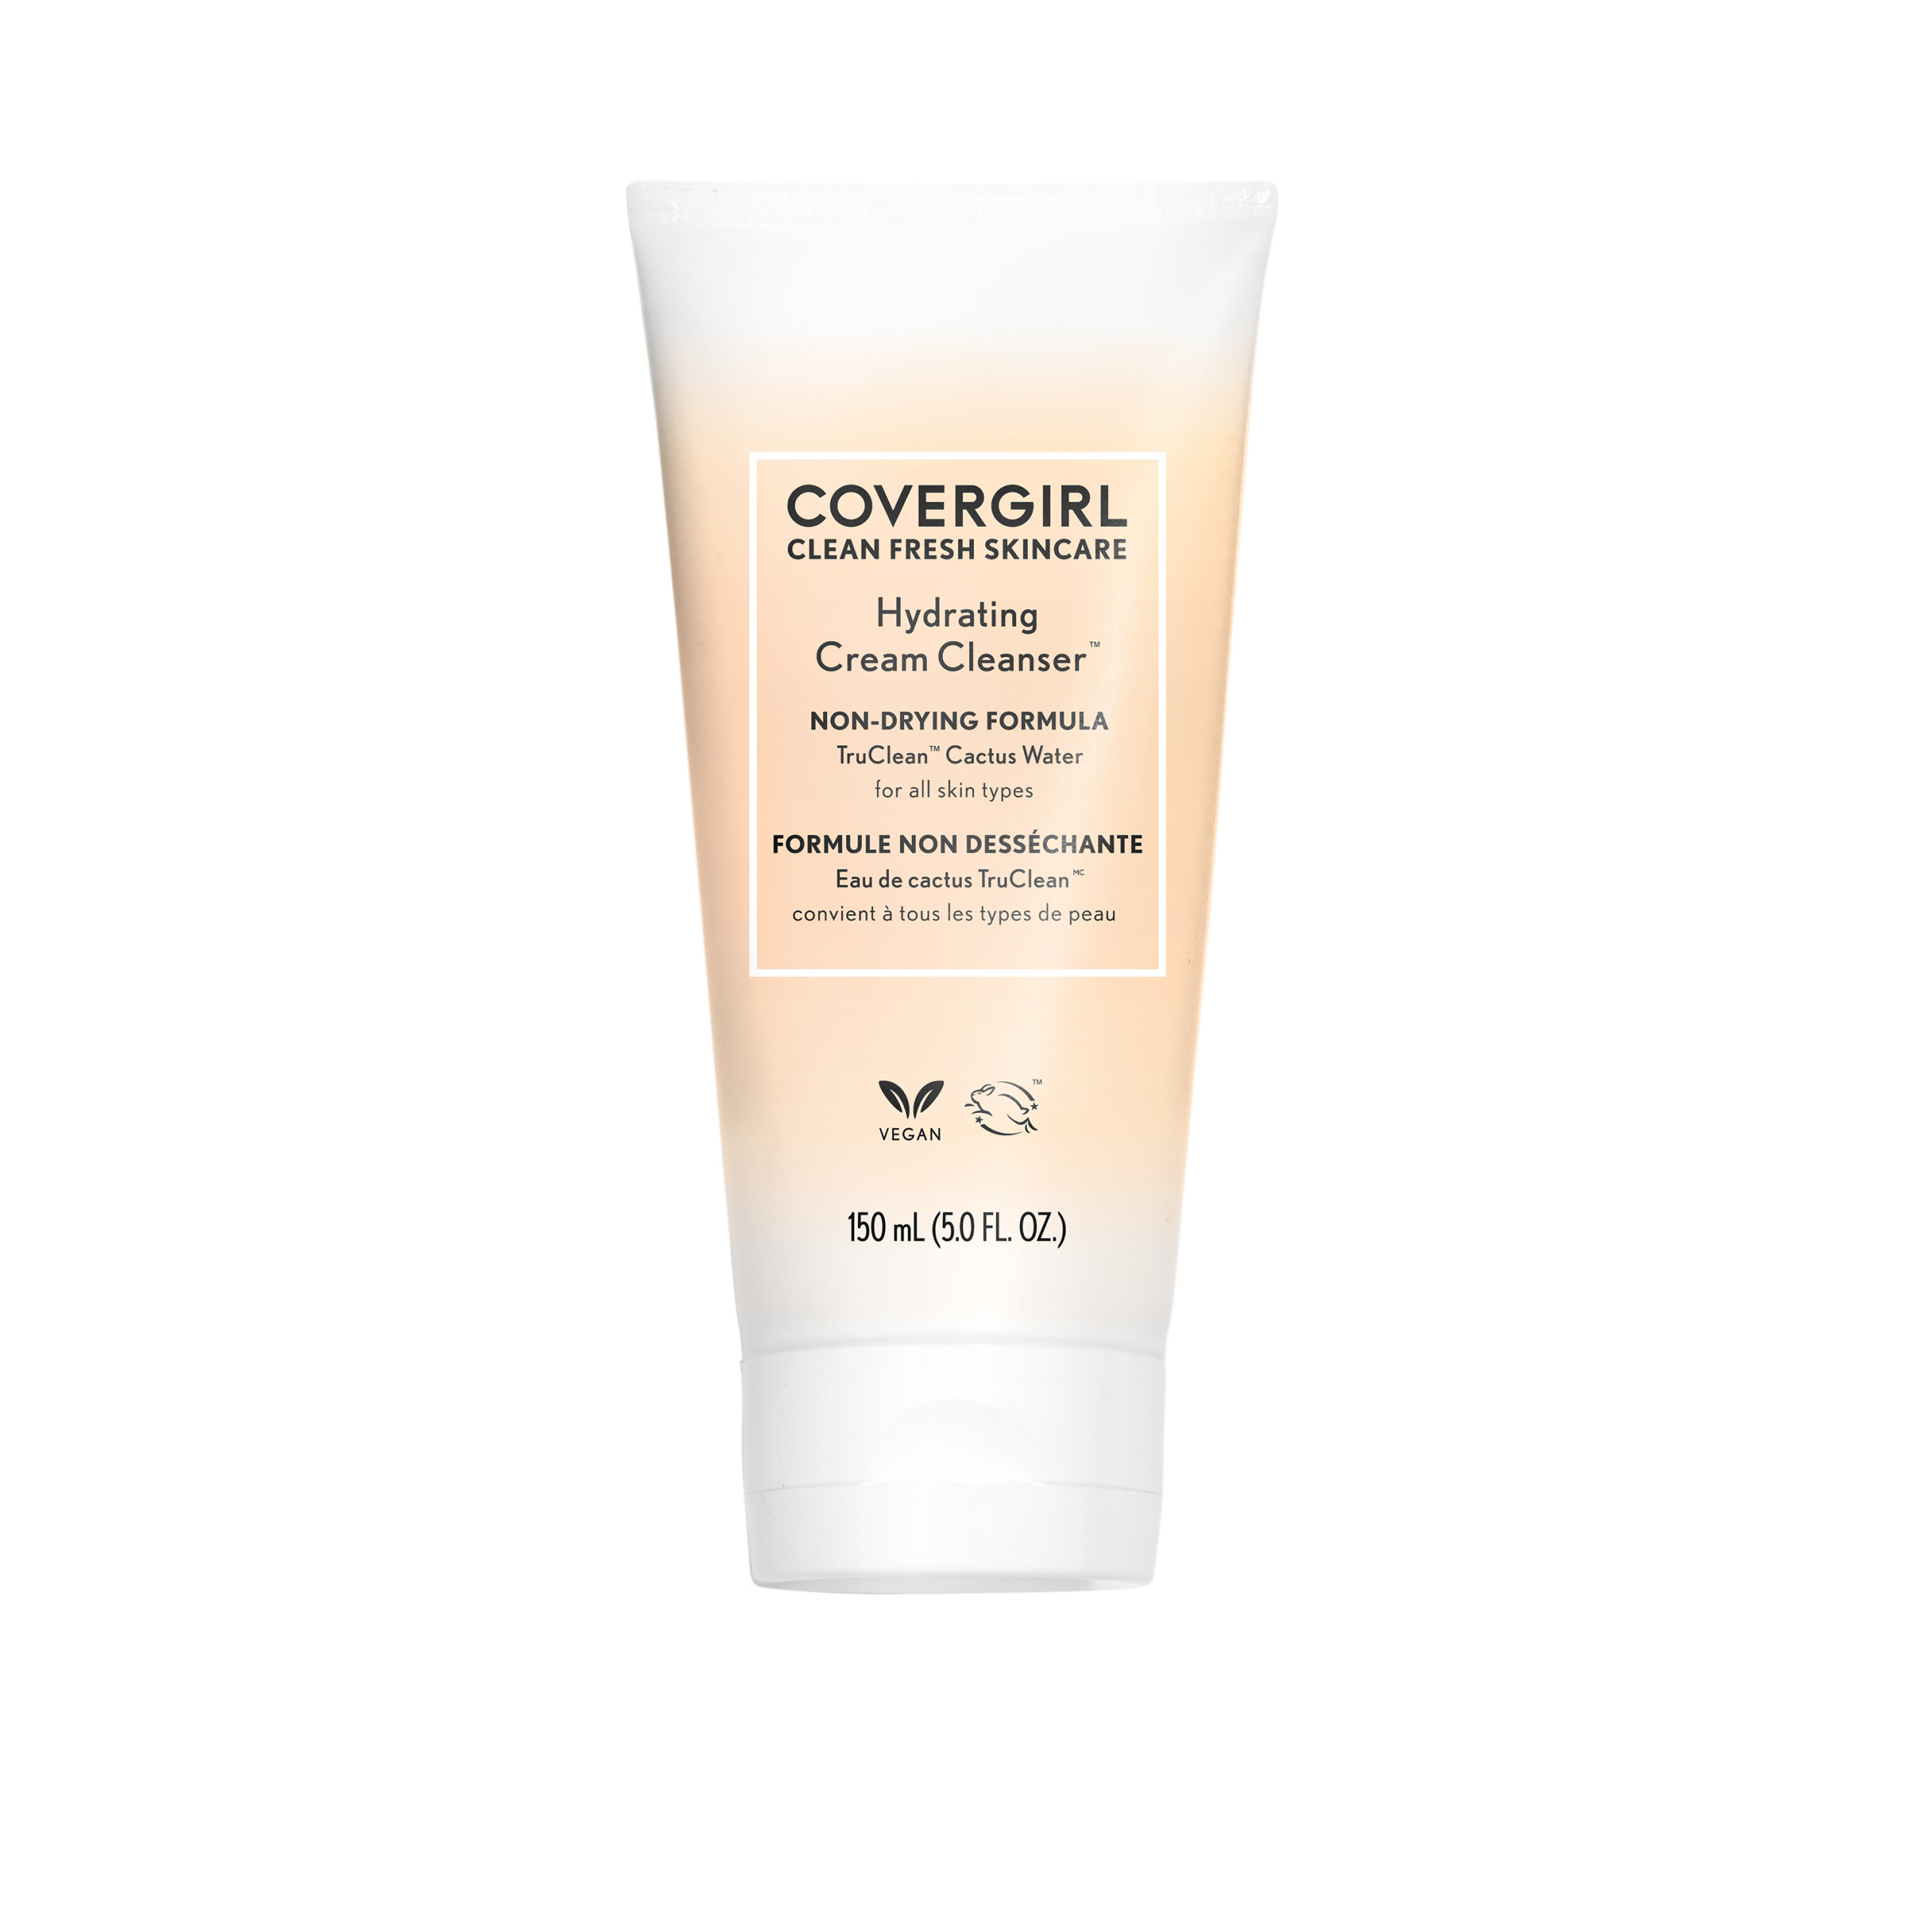 COVERGIRL Clean Fresh Skincare Hydrating Cream Face Cleanser, 5.0 fl oz - image 1 of 11